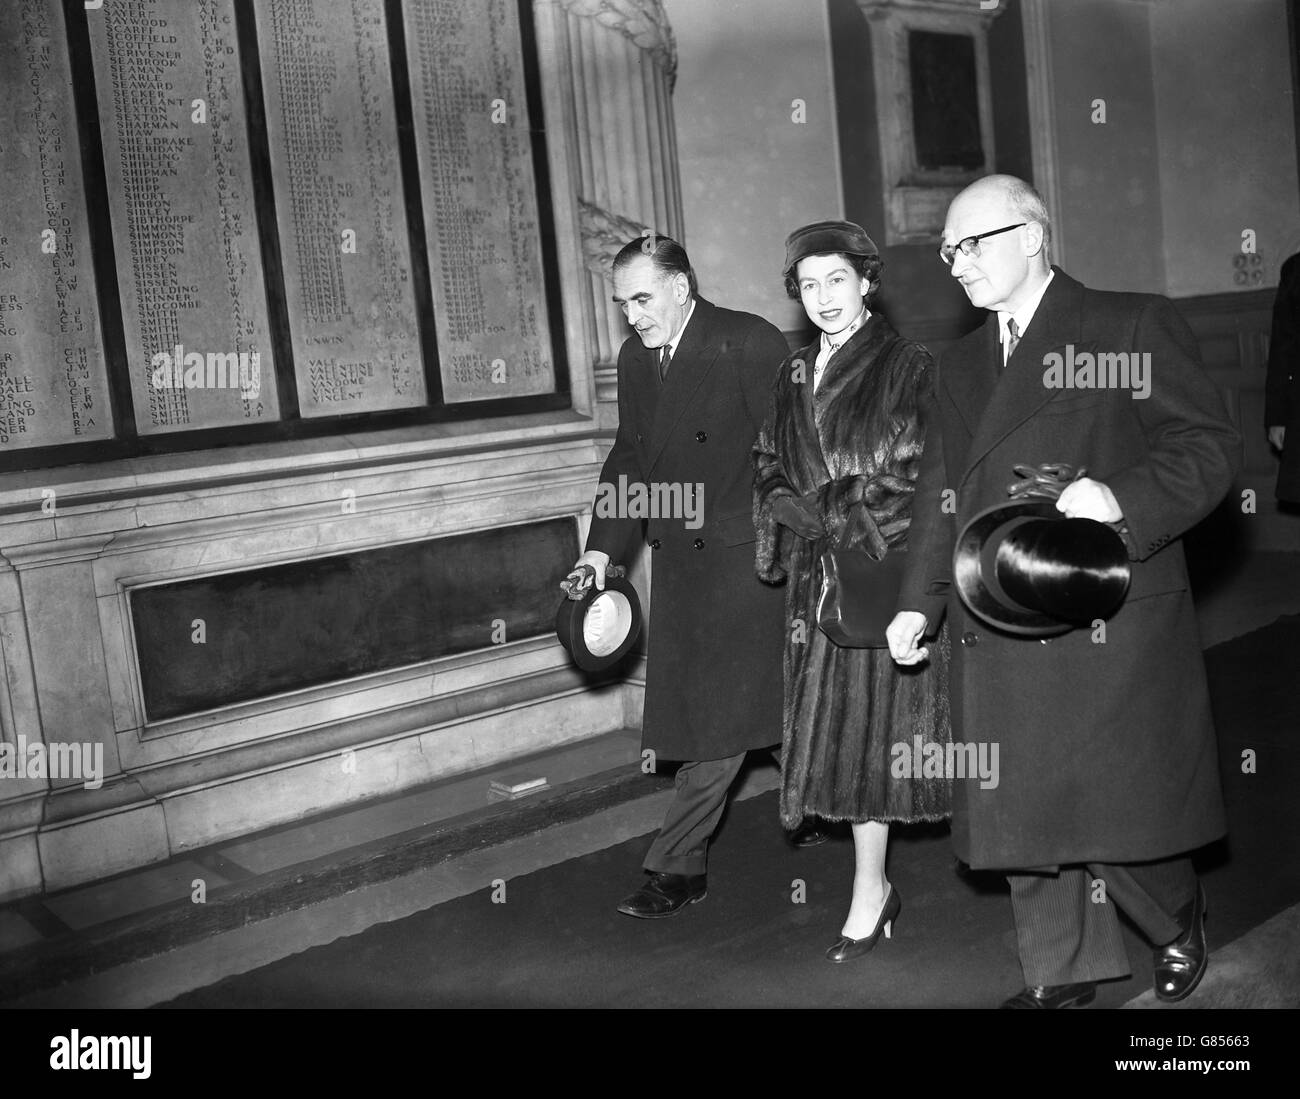 Queen Elizabeth II at Liverpool Street Station on her return to London from Sandringham. It was expected that Harold Macmillan would have an audience with the Queen at Buckingham Palace and submit of her approval the names of those he has chosen for posts in the new Government. Stock Photo